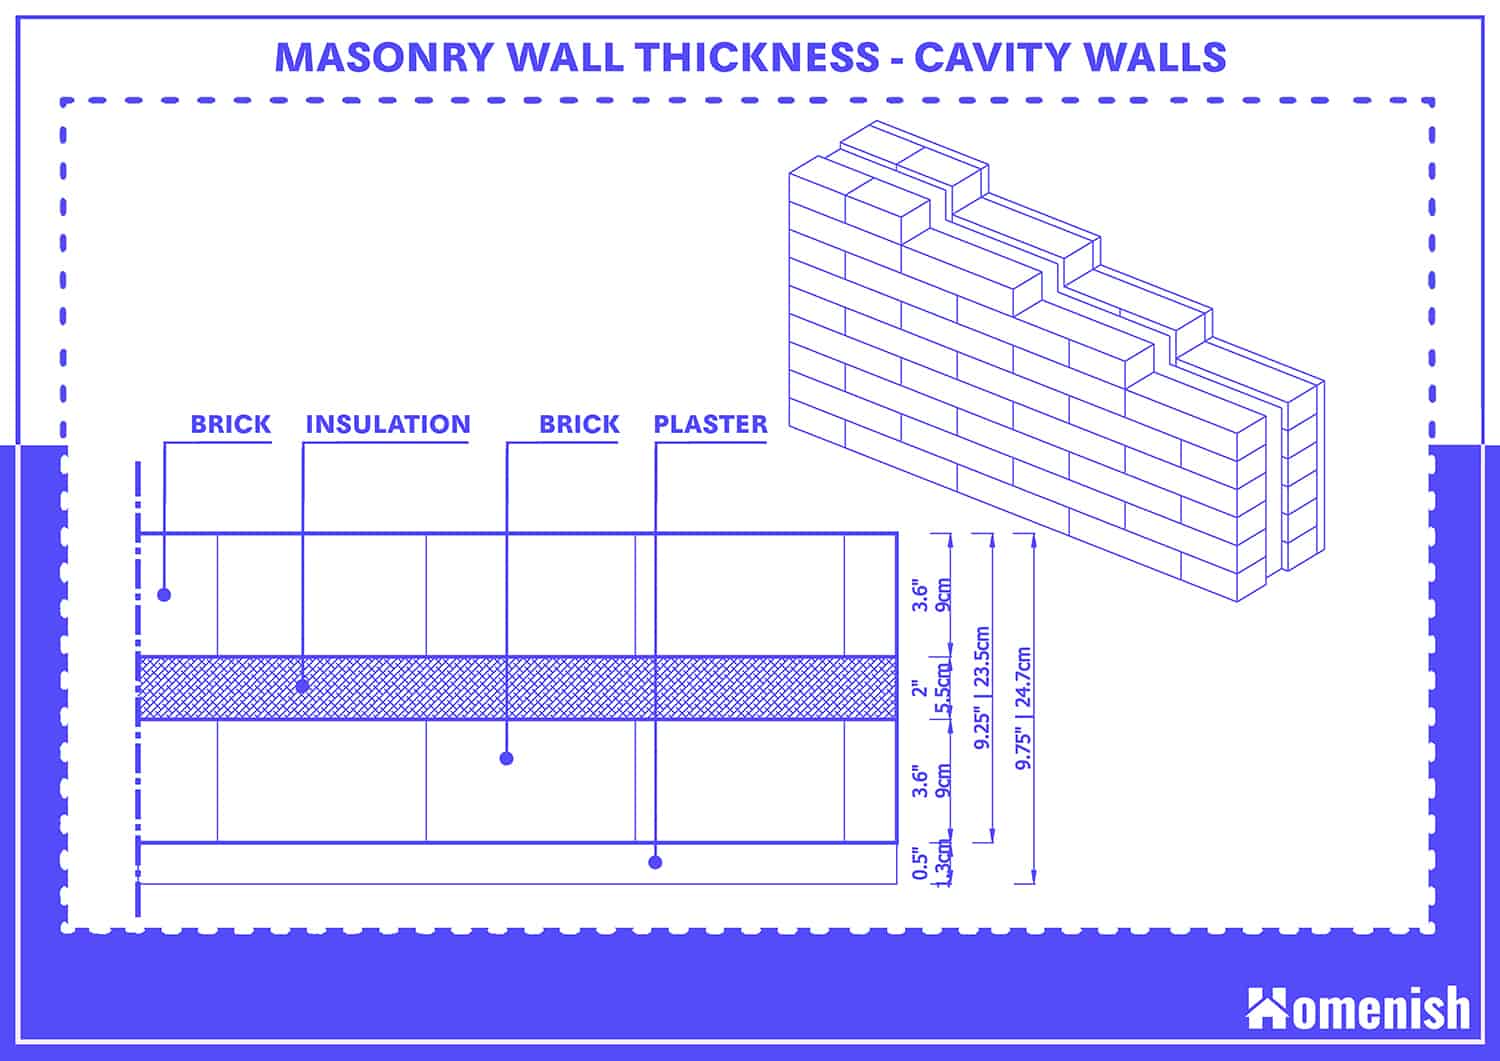 Standard Wall Thickness How Thick, Drywall Thickness For Bathroom Walls